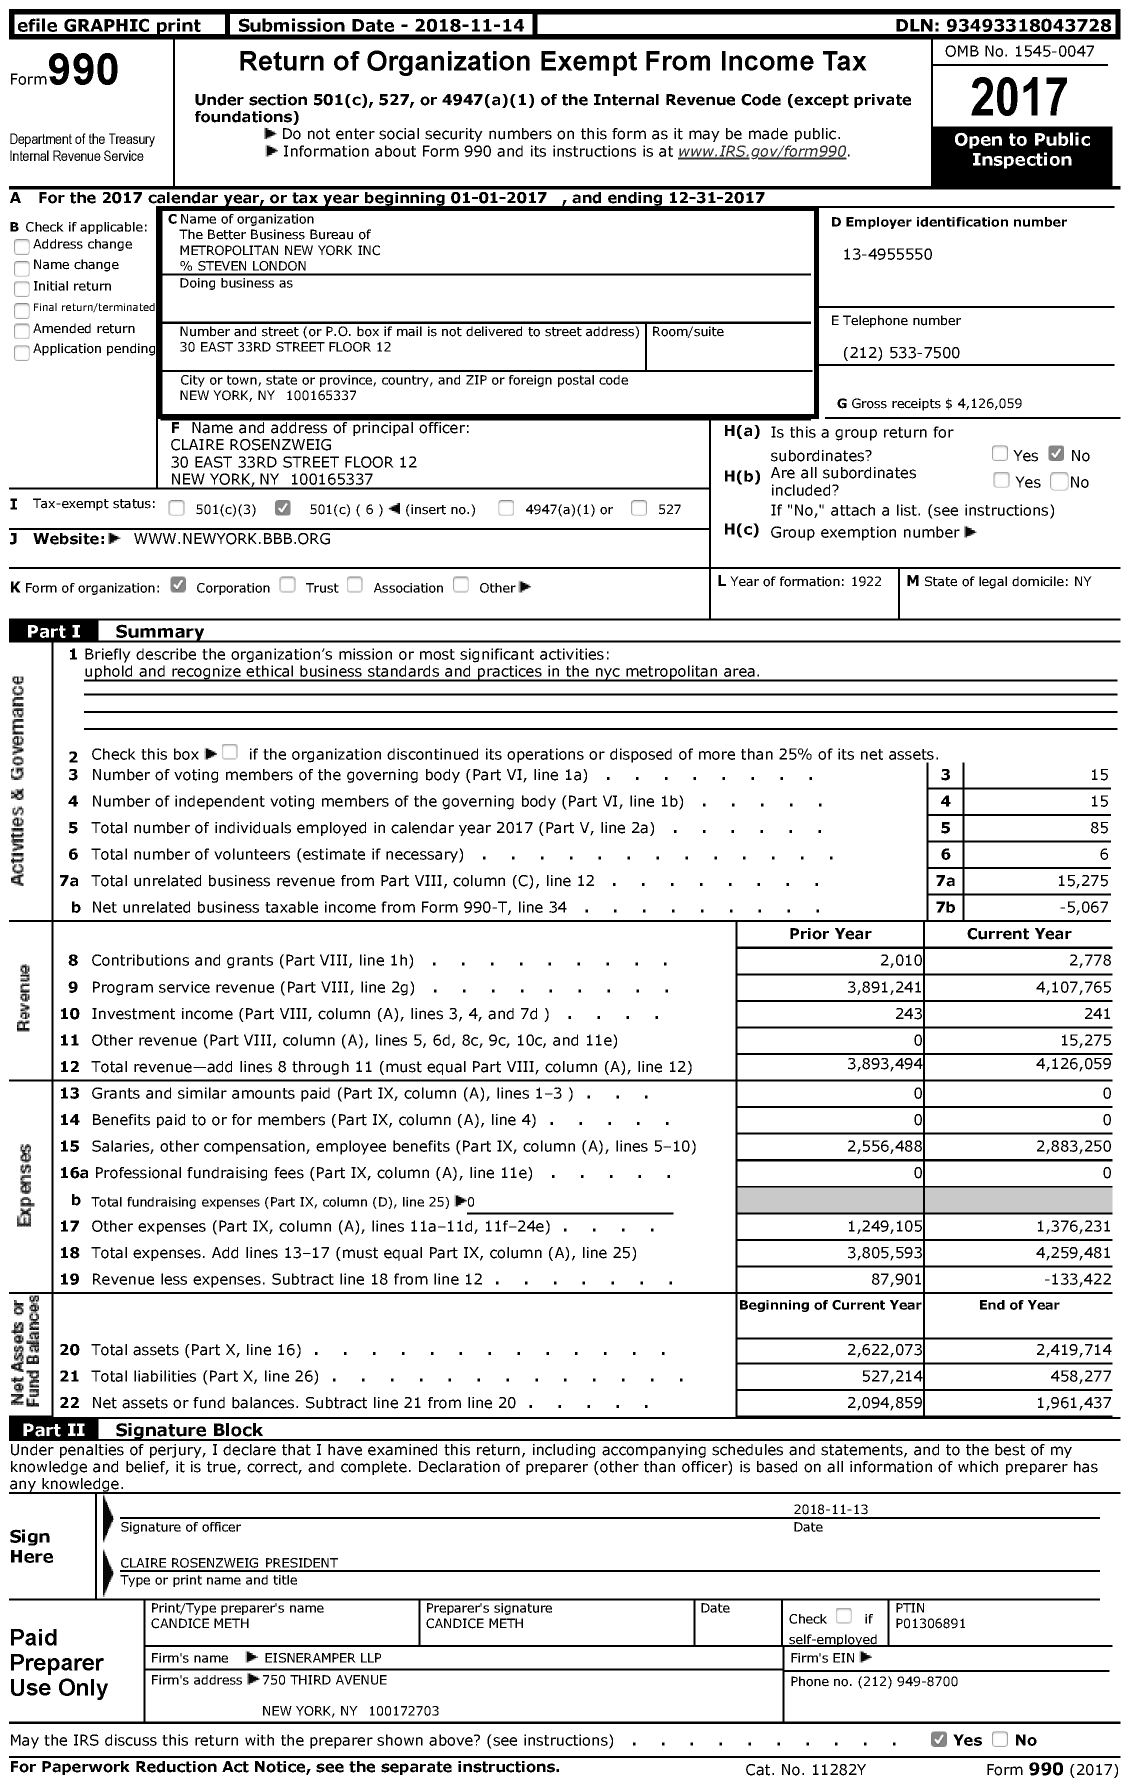 Image of first page of 2017 Form 990 for The Better Business Bureau of METROPOLITAN NEW YORK